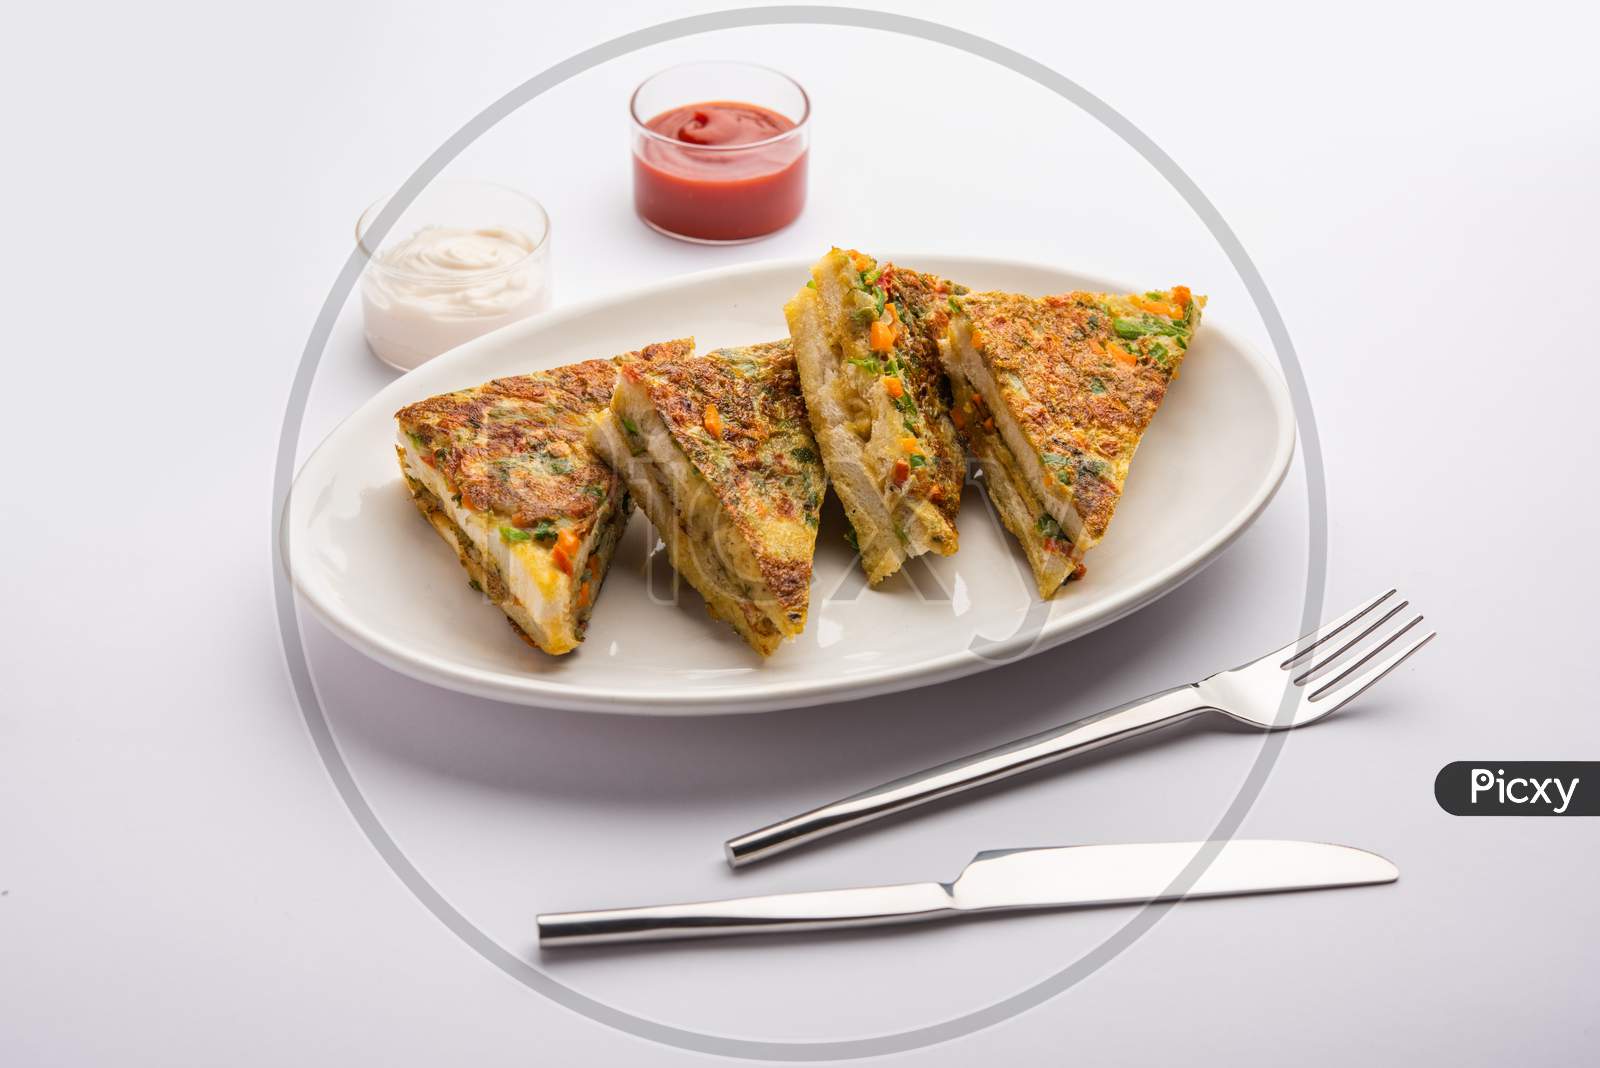 Bread Omelette Is A Quick And Easy Breakfast From India. Fresh Bread Slices Dipped Into Egg Batter With Spices And Shallow Fried. Served With Tomato Ketchup And Tea